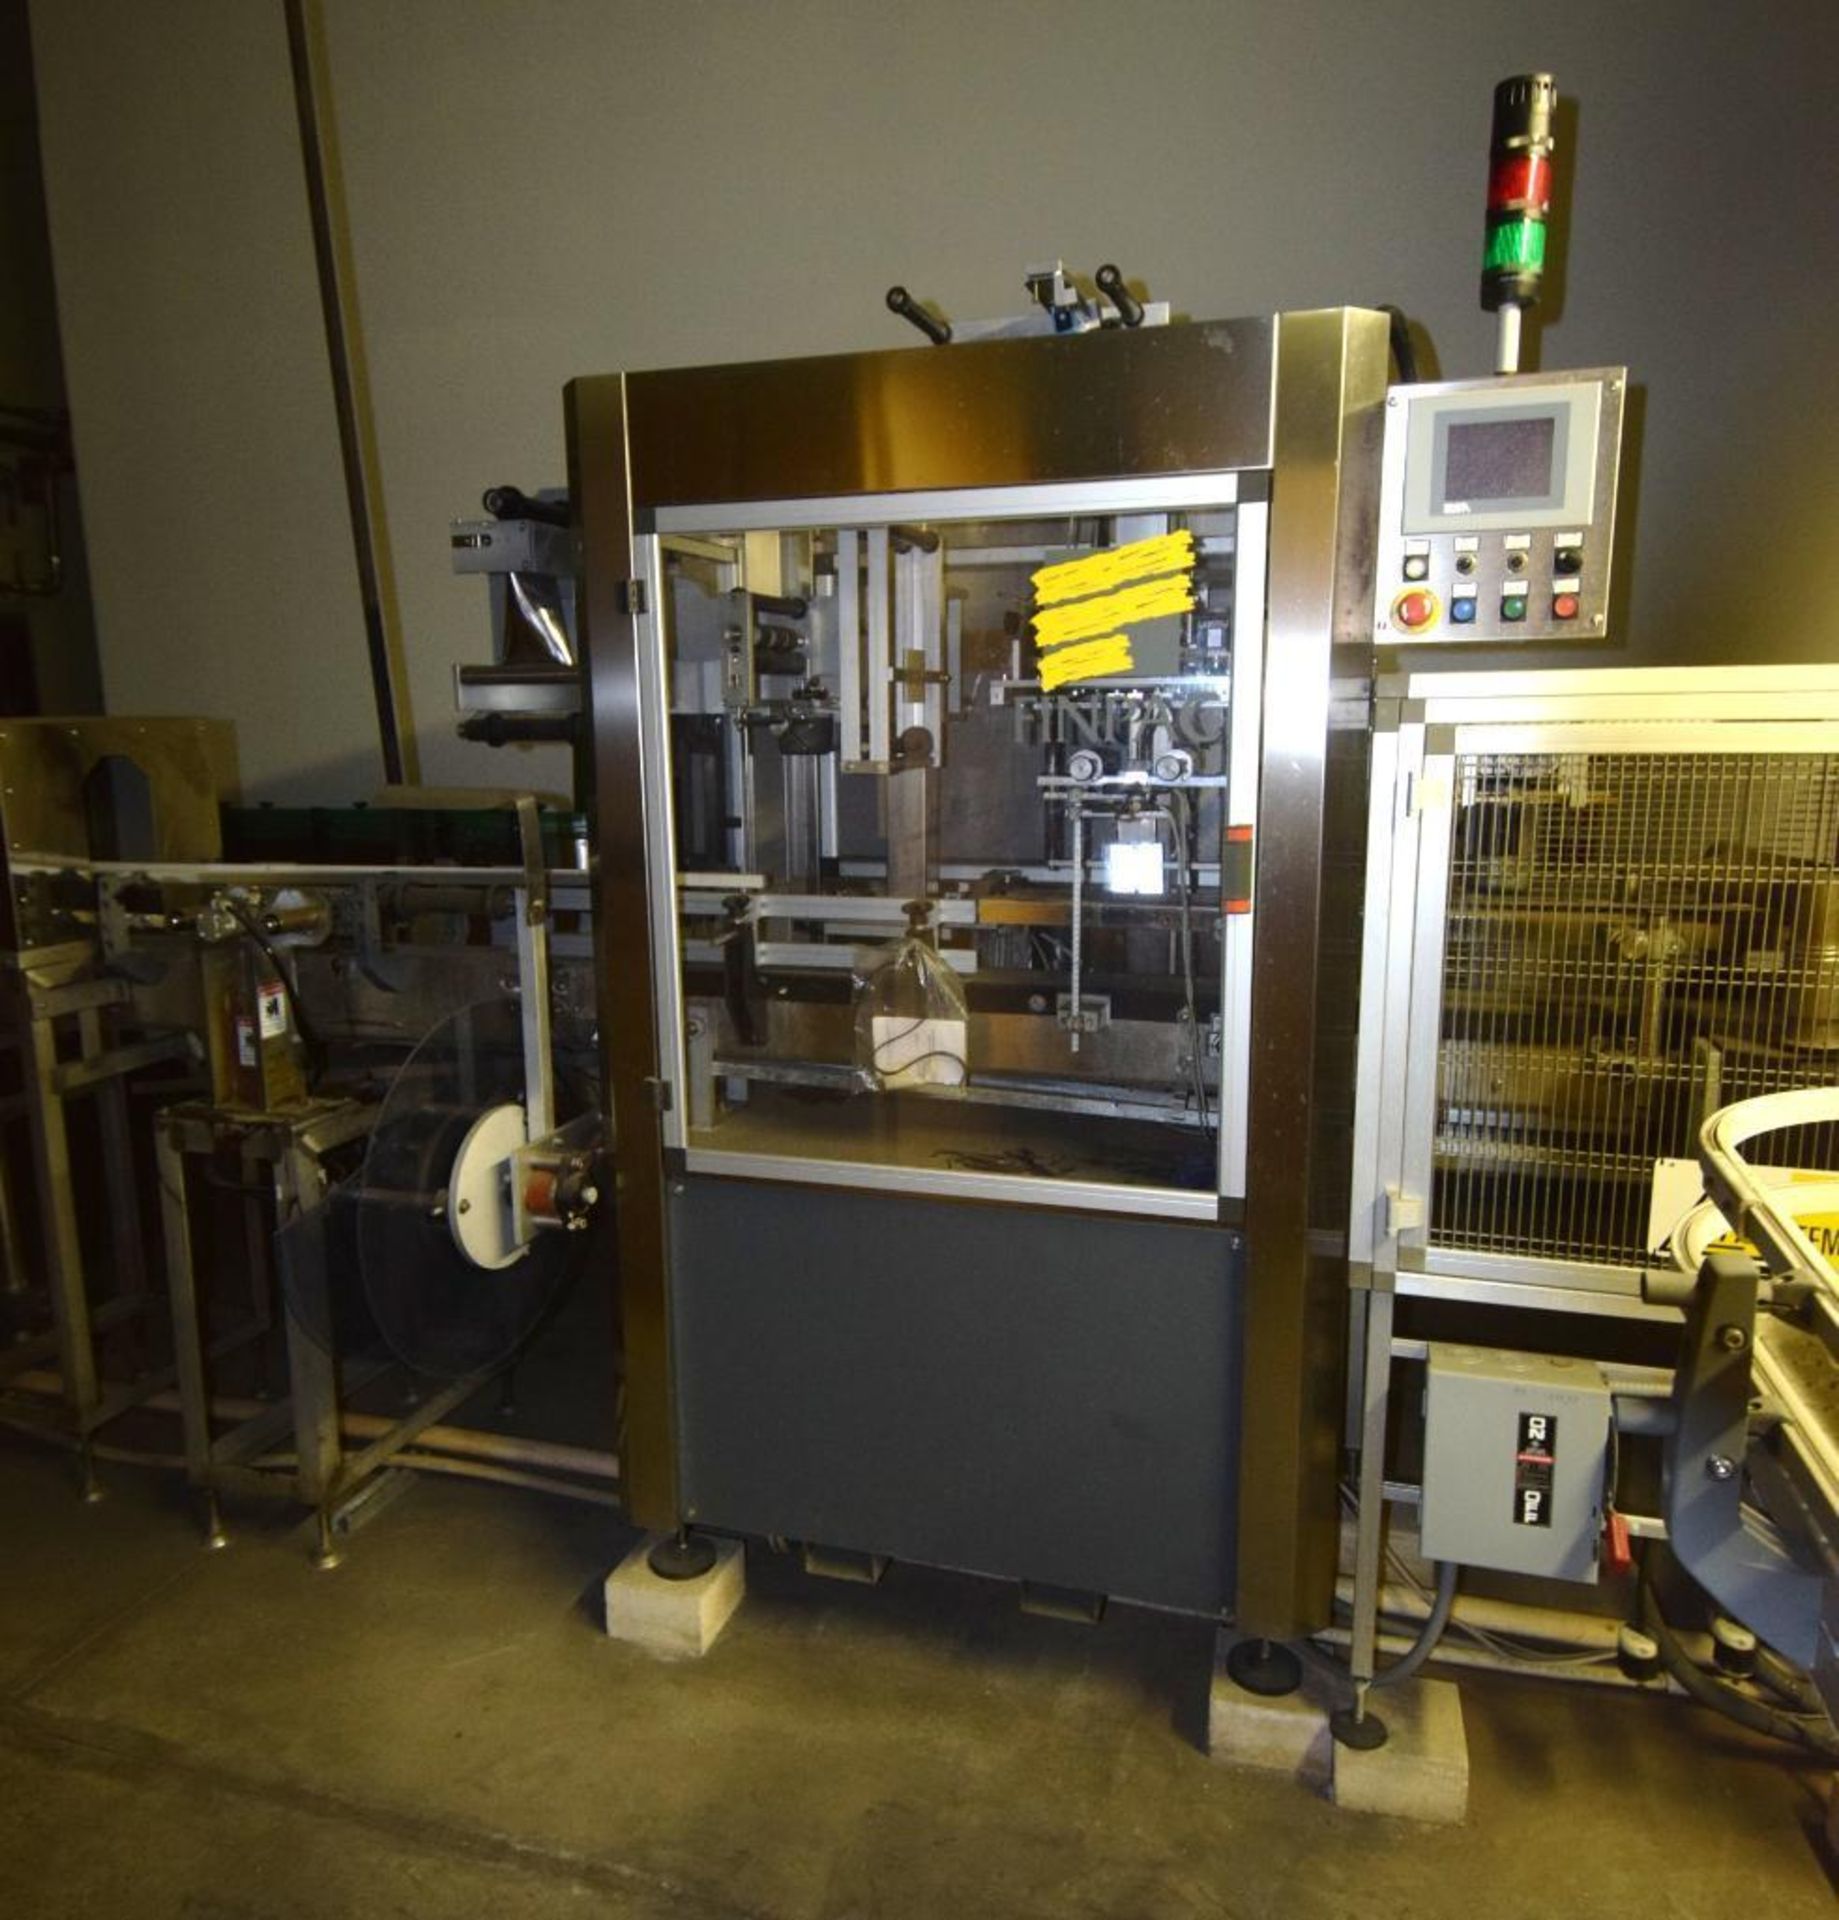 LOT: Finpac Shrink Sleeving System Model SHM-A1, S/N 12509 (2009), Designed to Accept Labeling Films - Image 3 of 17